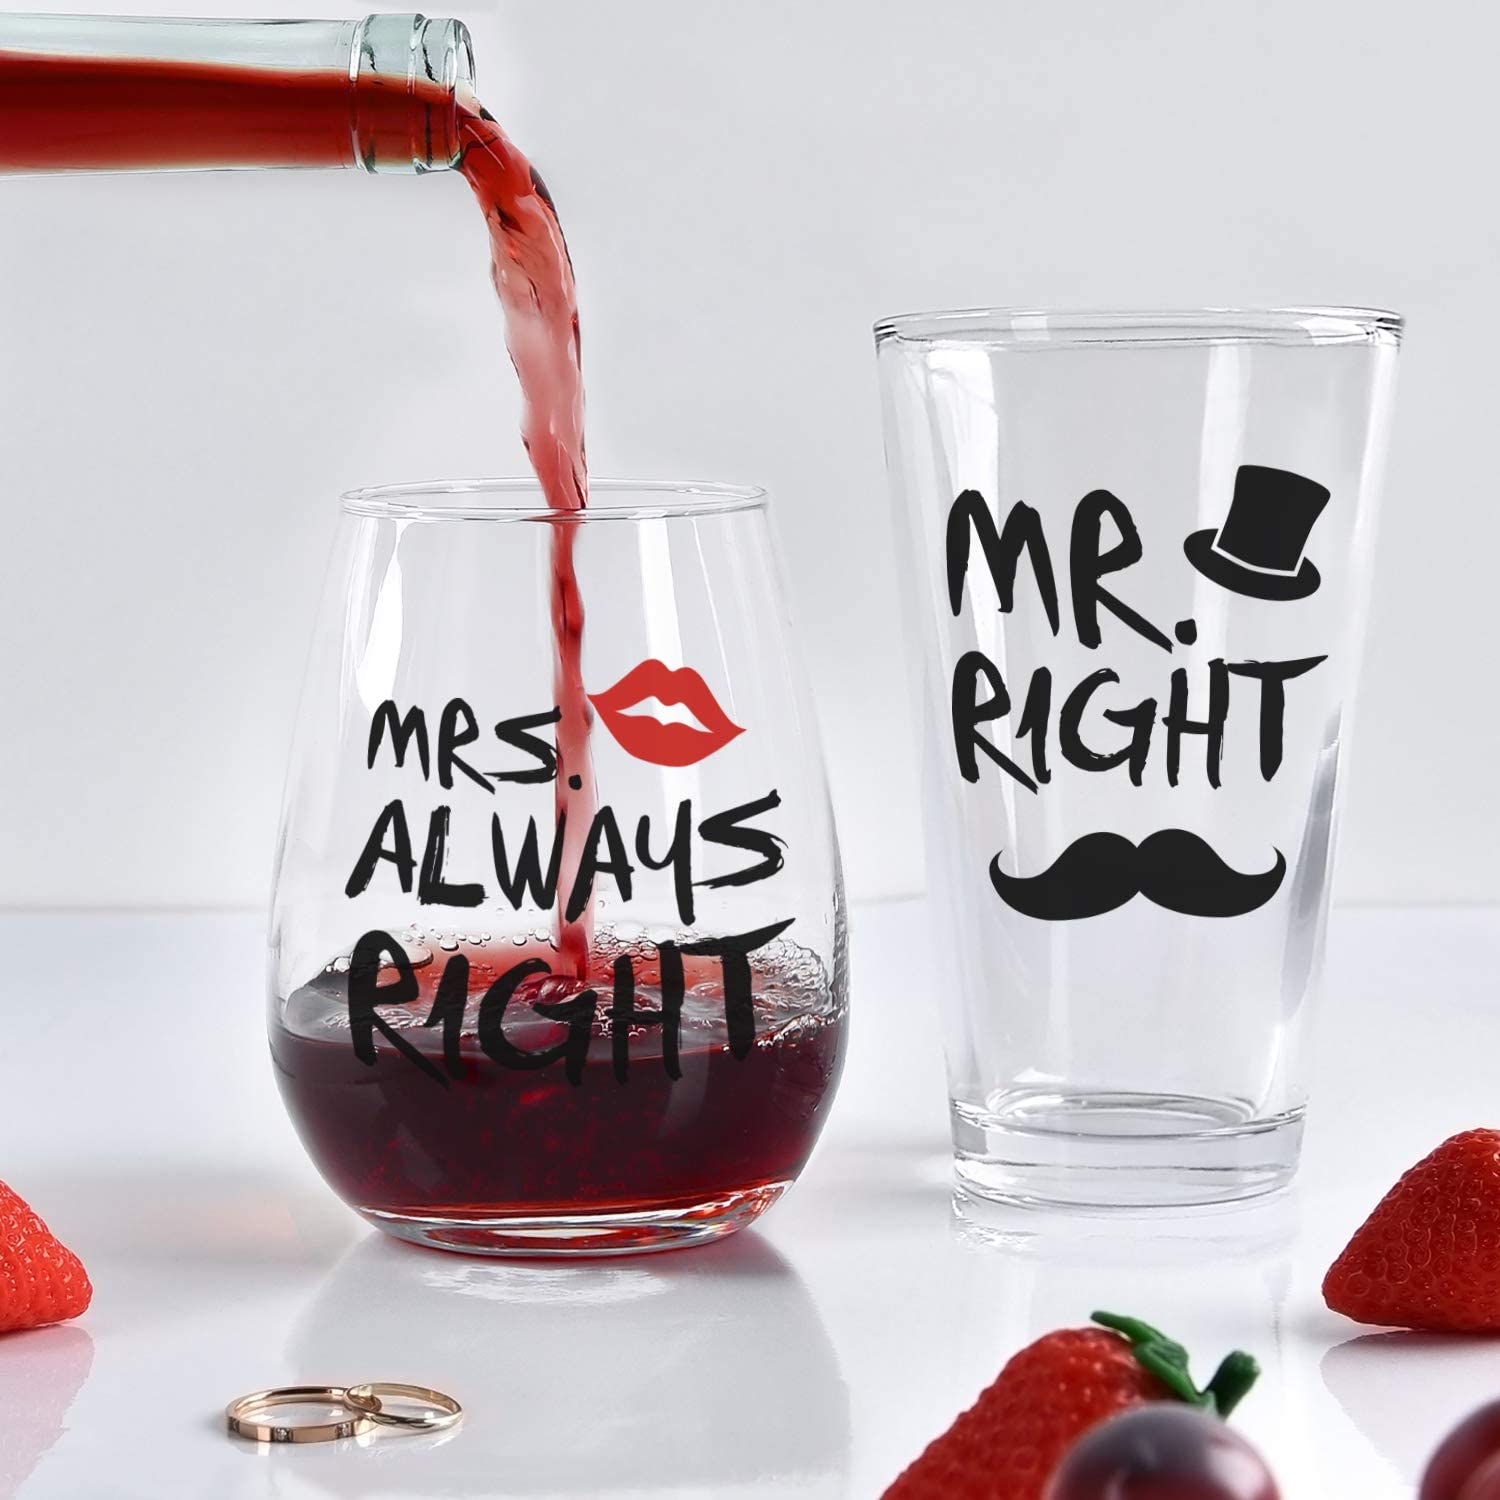 Red wine is being poured into a stemless wine glass which says Mrs Always Right. There is also a Mr Right matching beer glass.